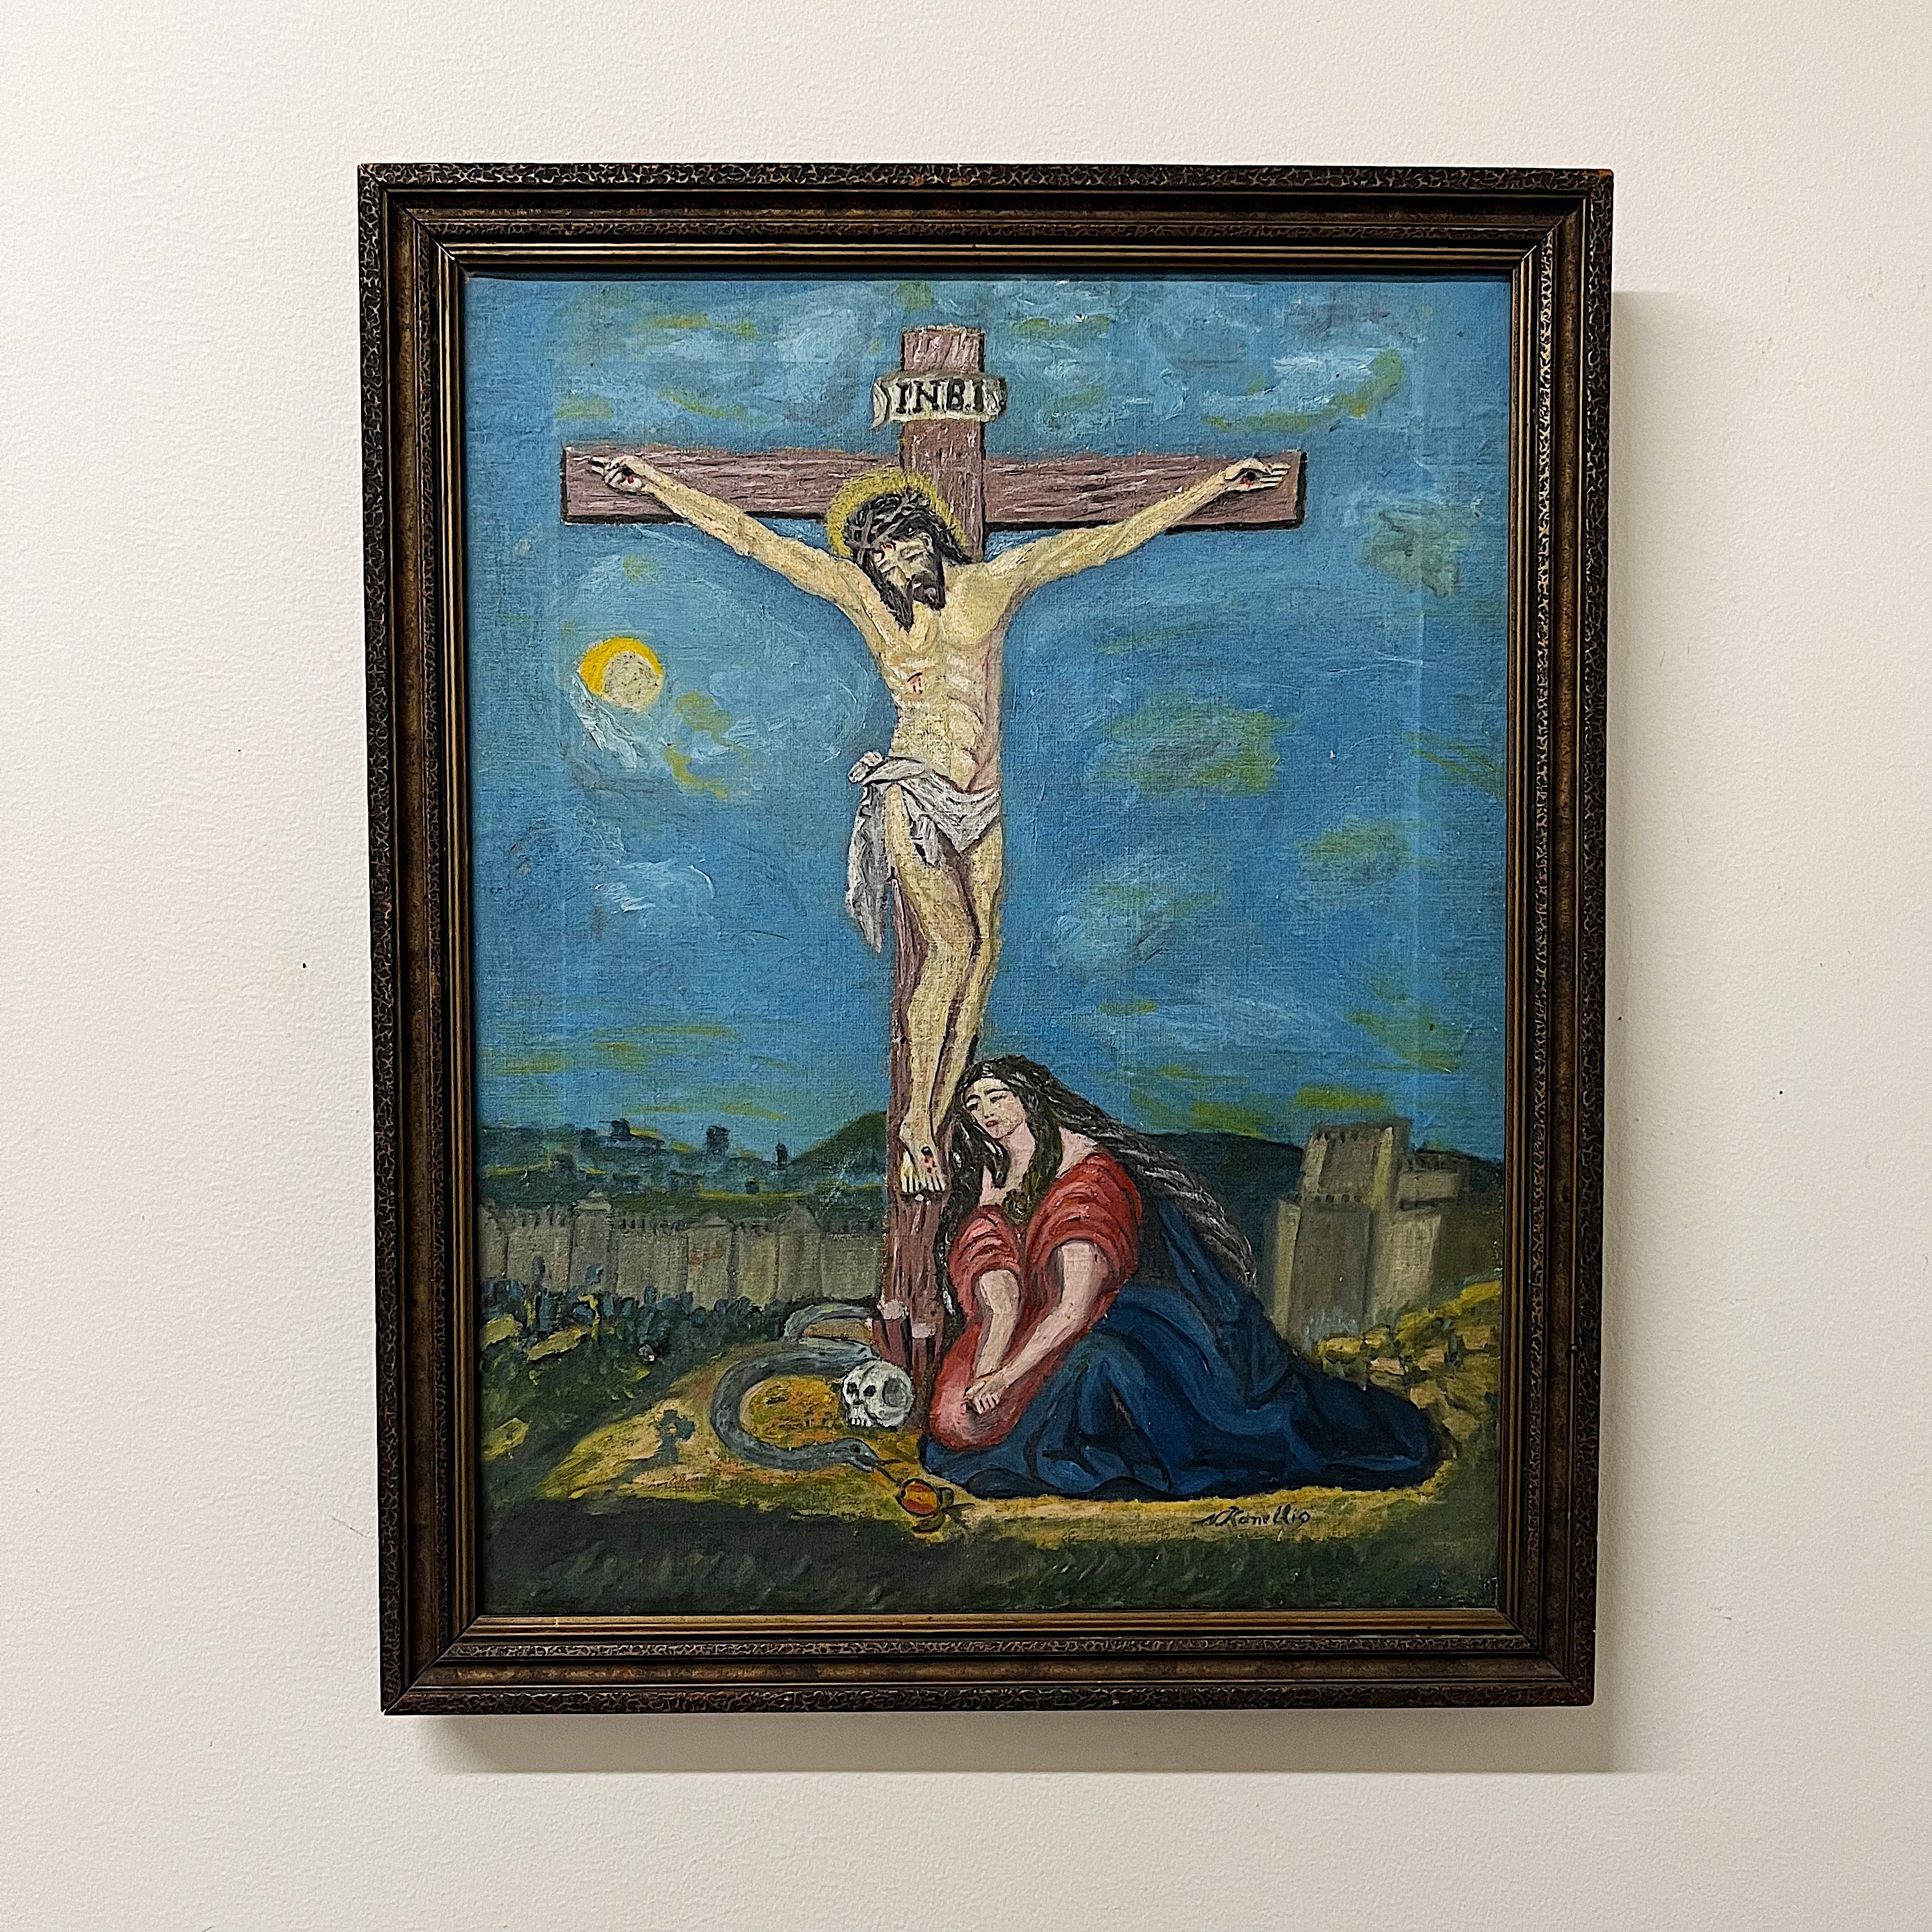 Antique Crucifixion Painting with Skull and Snake - Early 1900s Folk Art - Signed N. Kanellis - Iowa Origins - Unusual Outsider Art